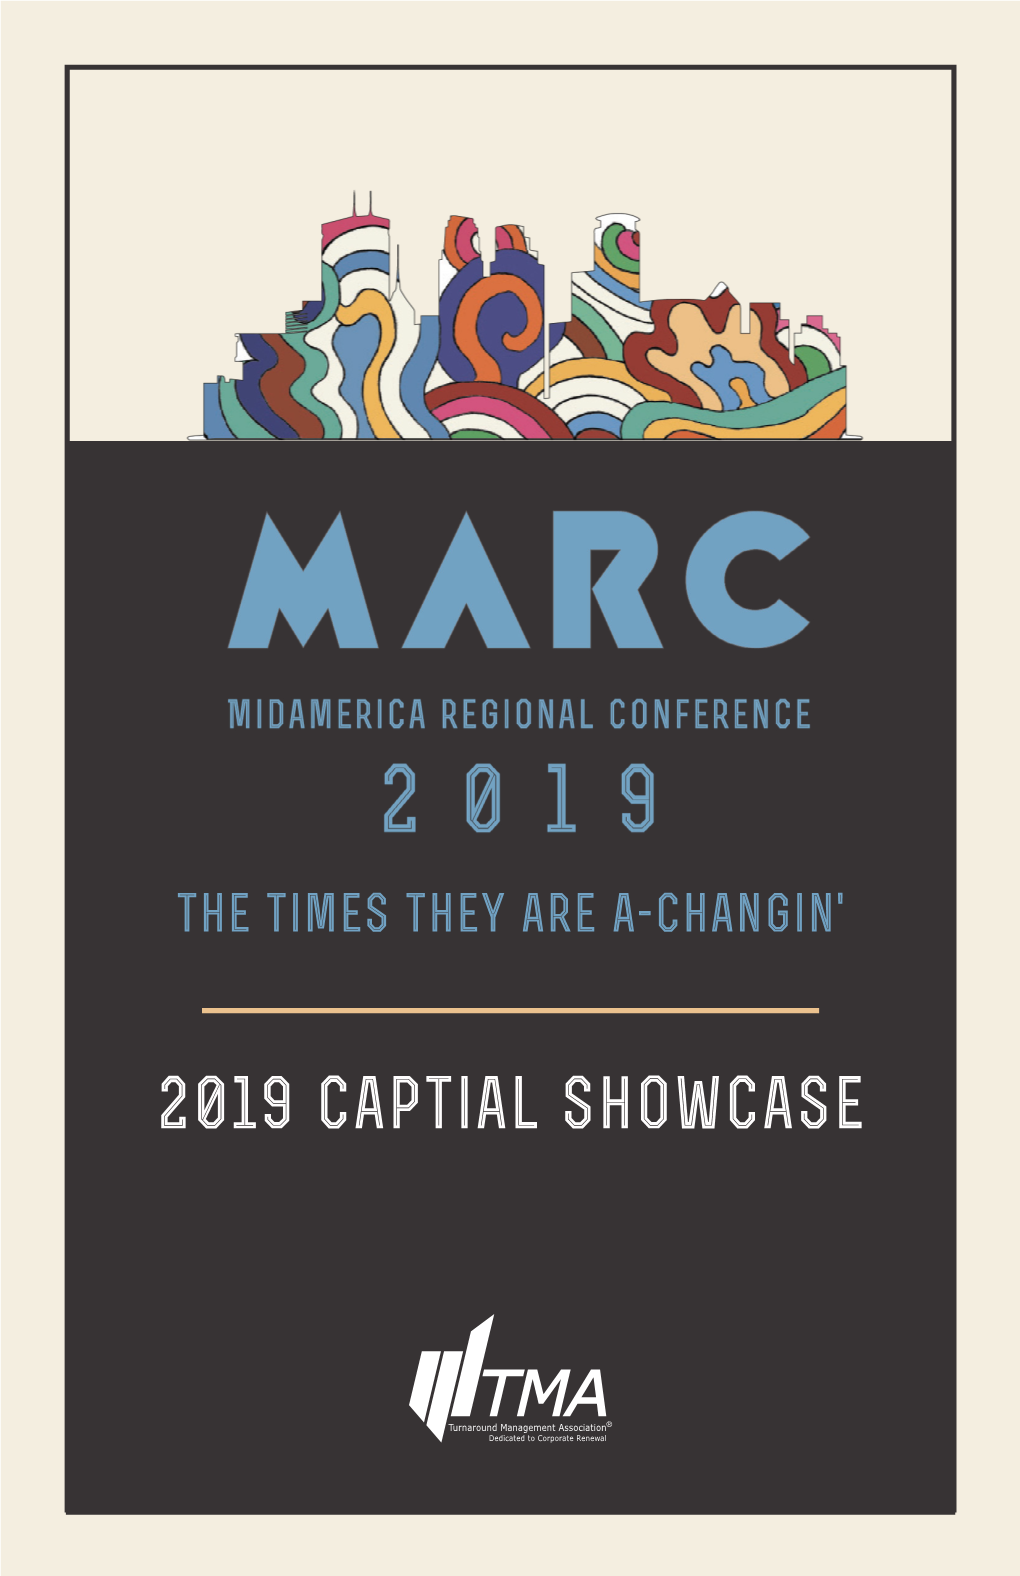 Welcome to the Marc 2019 Capital Showcase